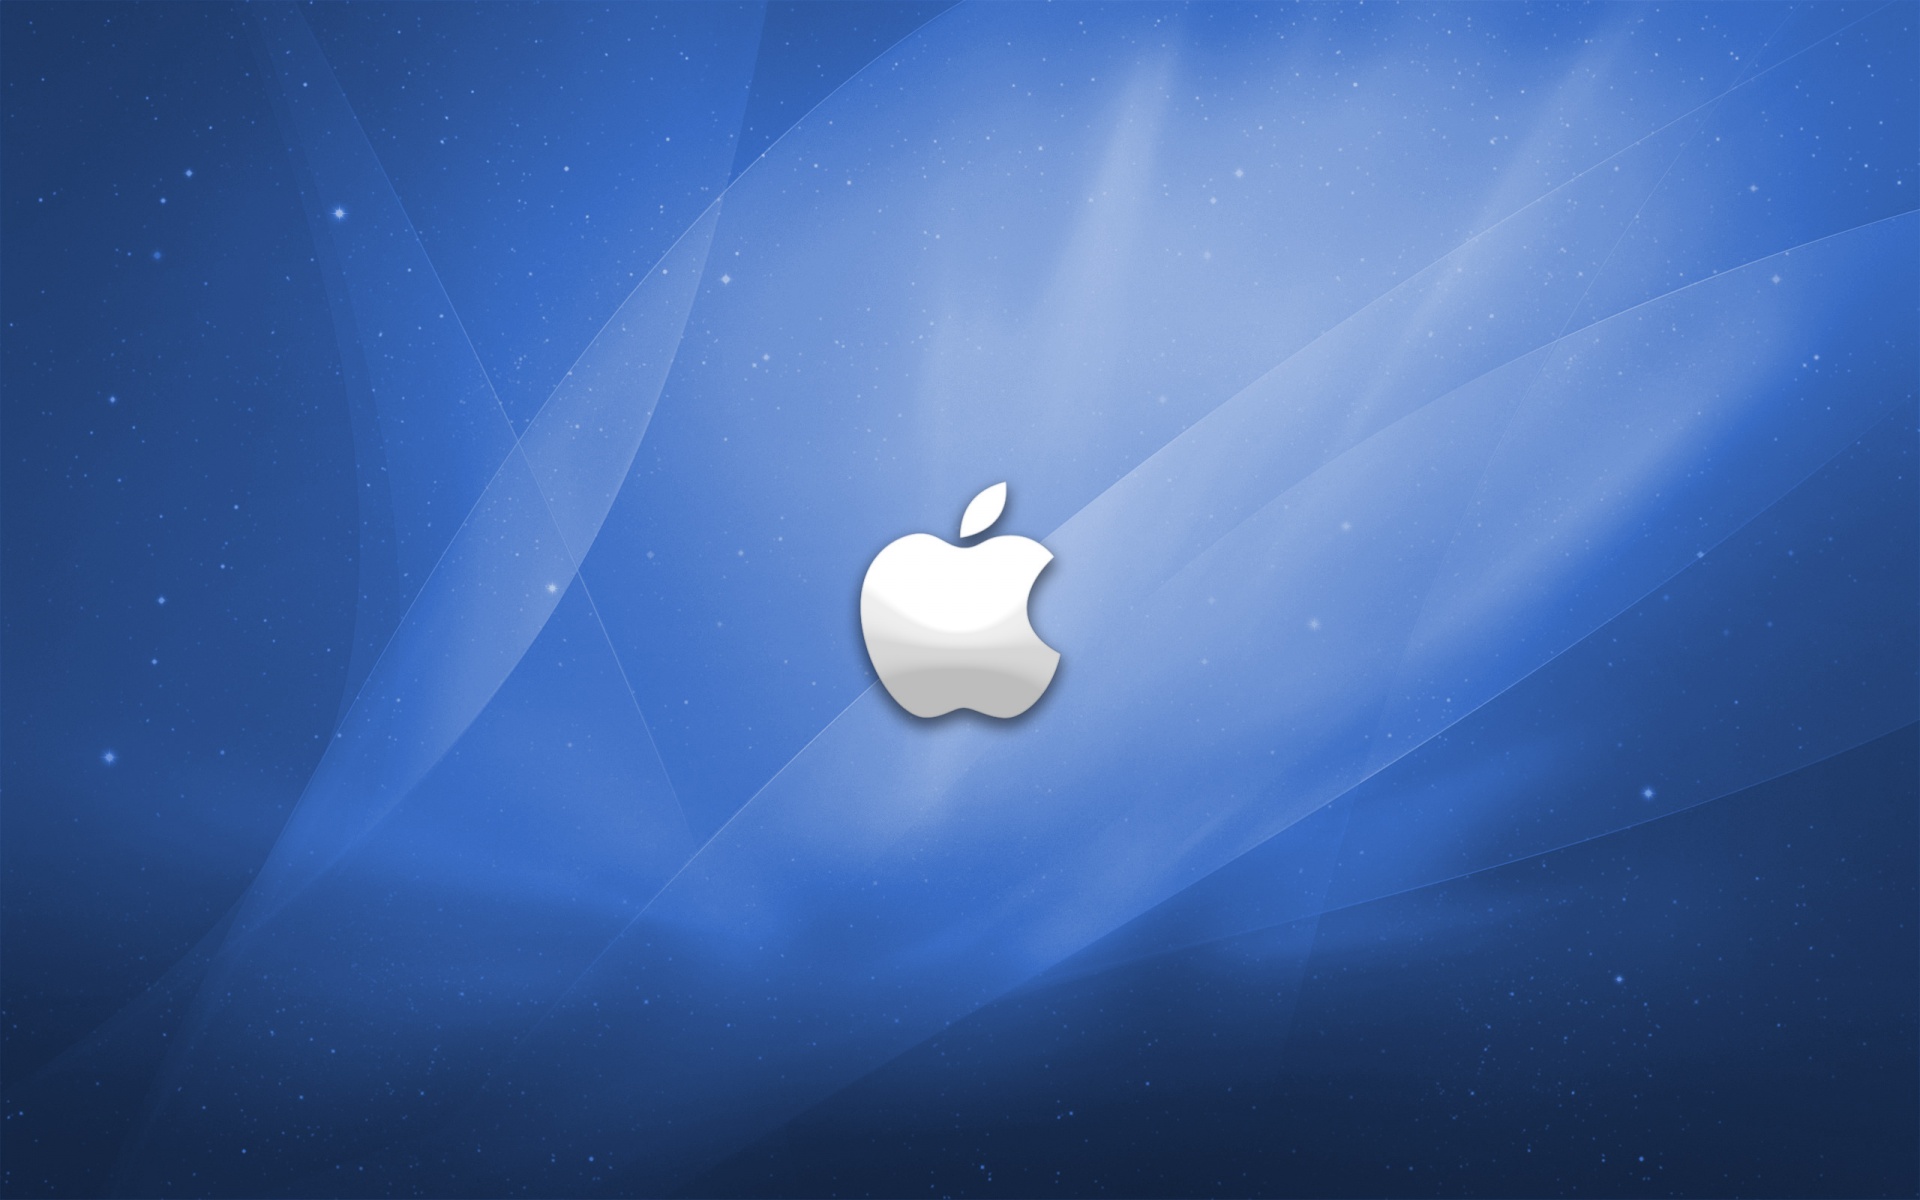 Another Apple Background